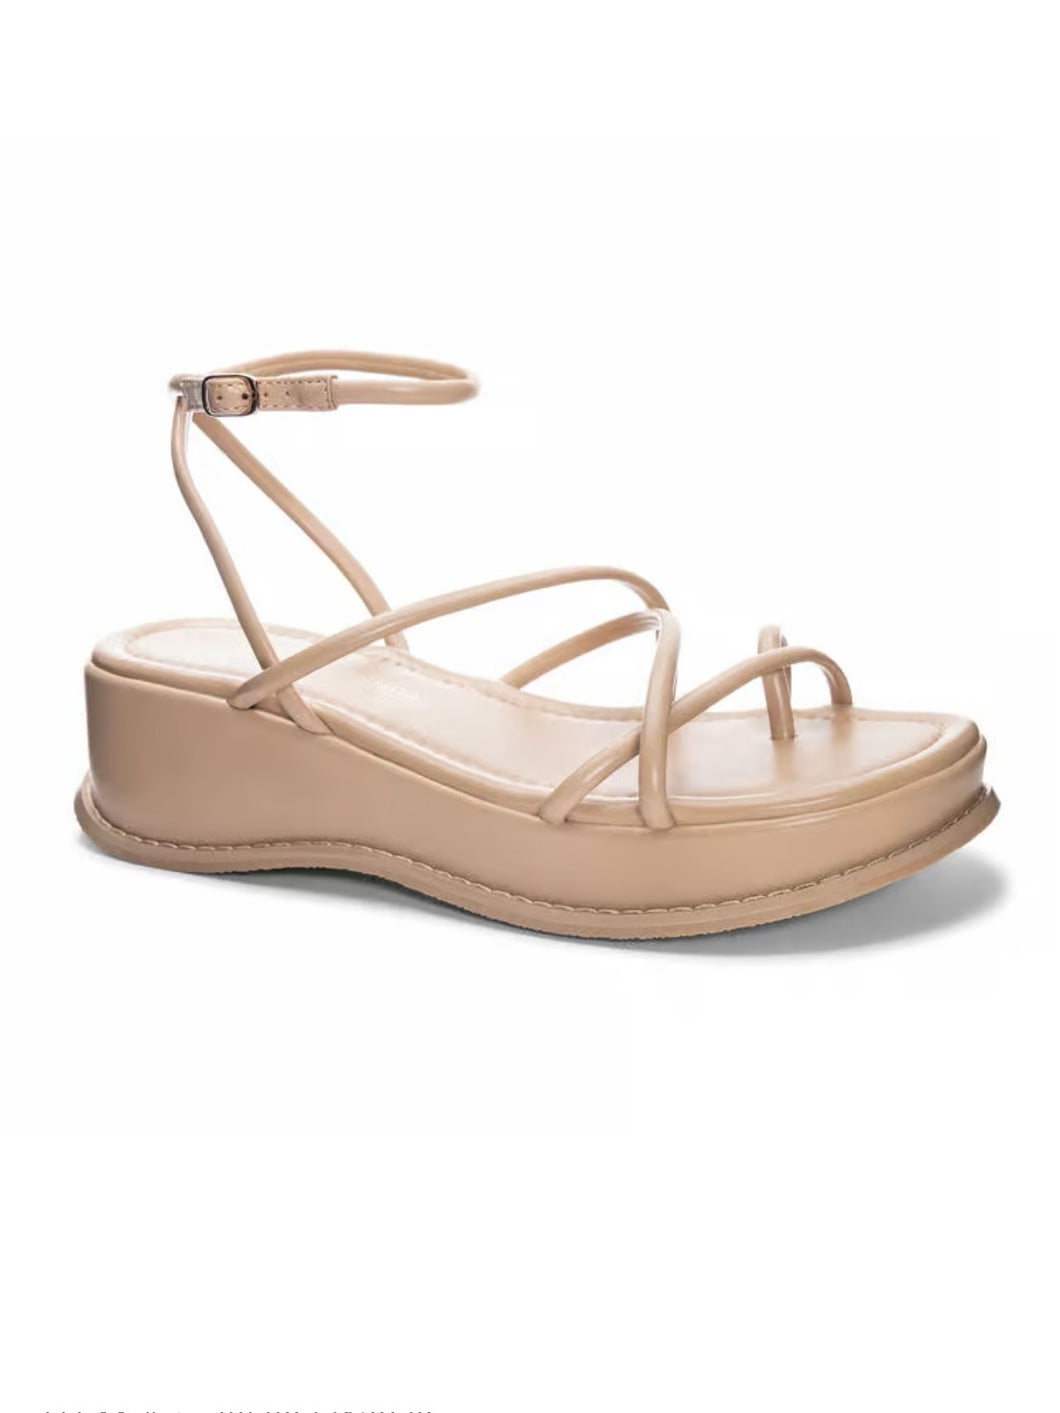 Chinese Laundry Nude Claire Sandals